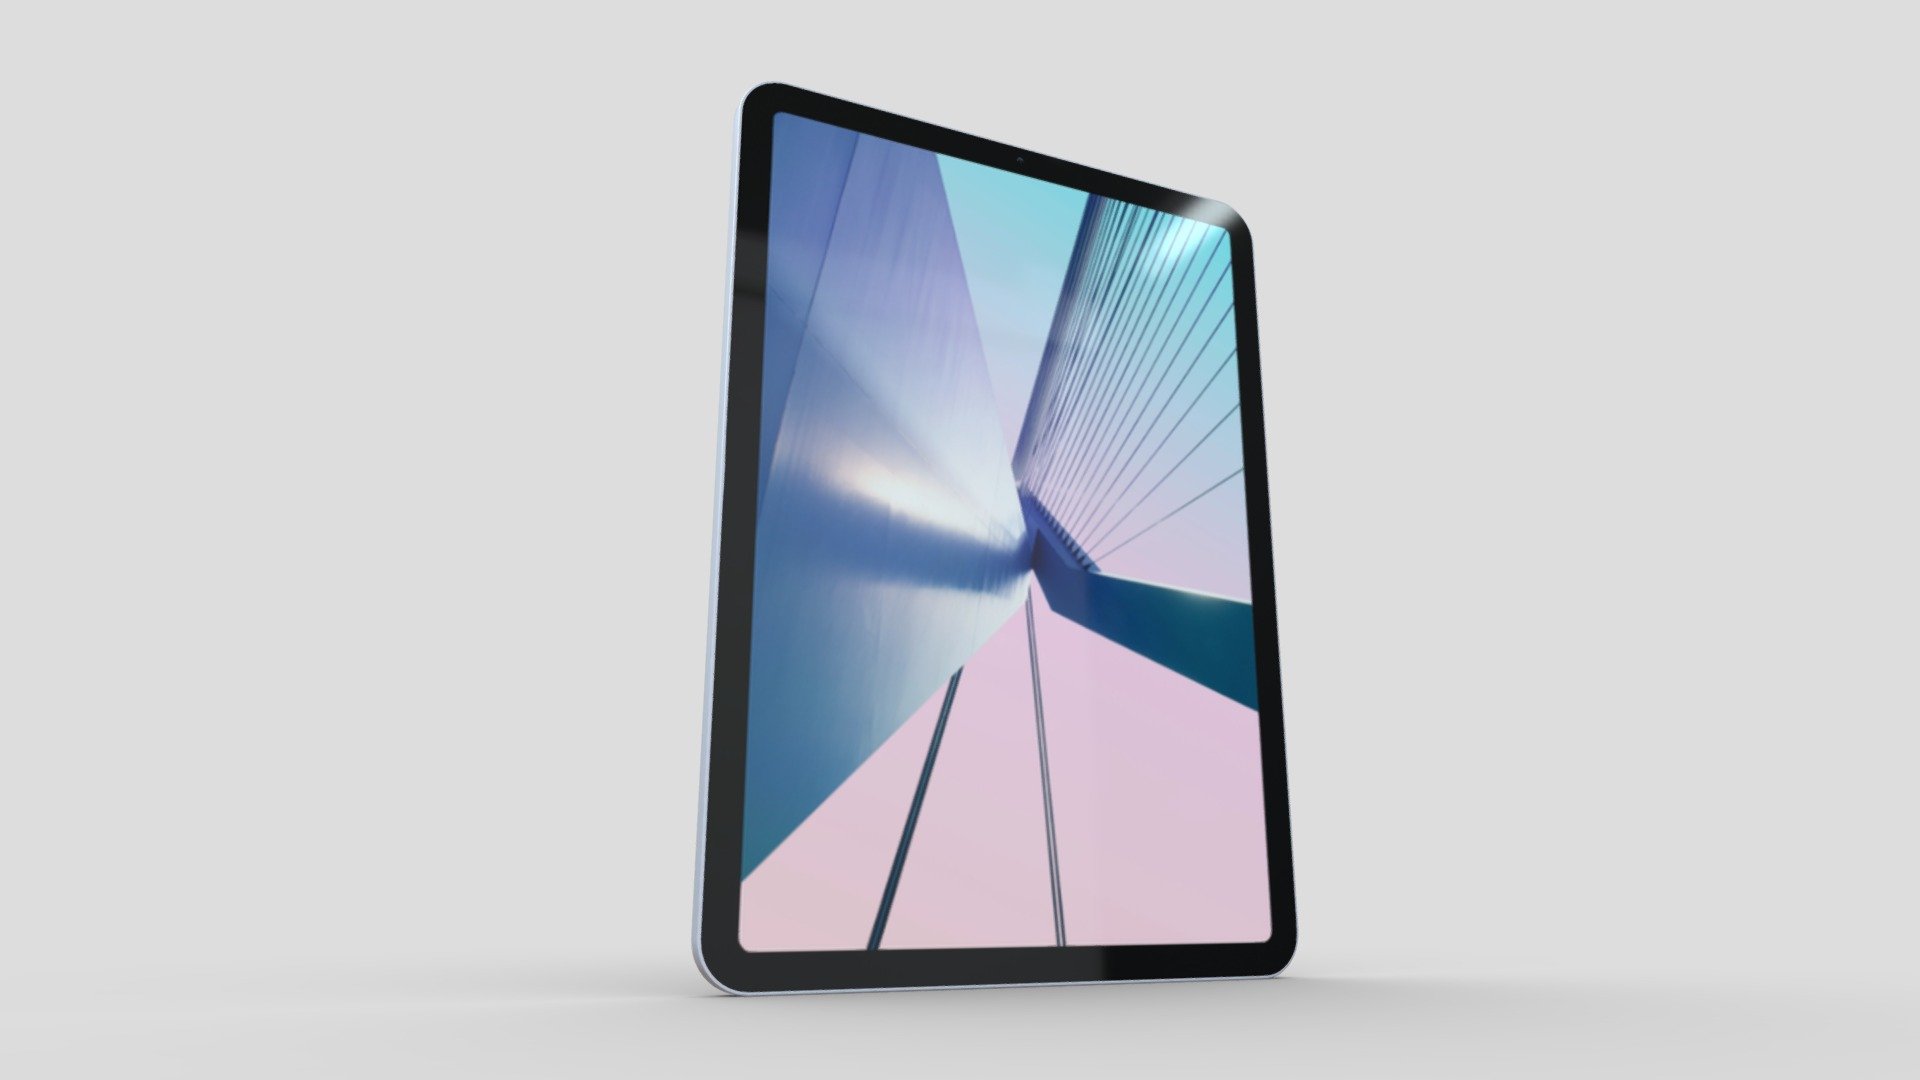 All new iPad air 4 was announced on September 15th and it features new all-screen design with larger 10.9-inch display, new 12MP rear camera, next-generation Touch ID sensor and A14 Bionic chip 3d model